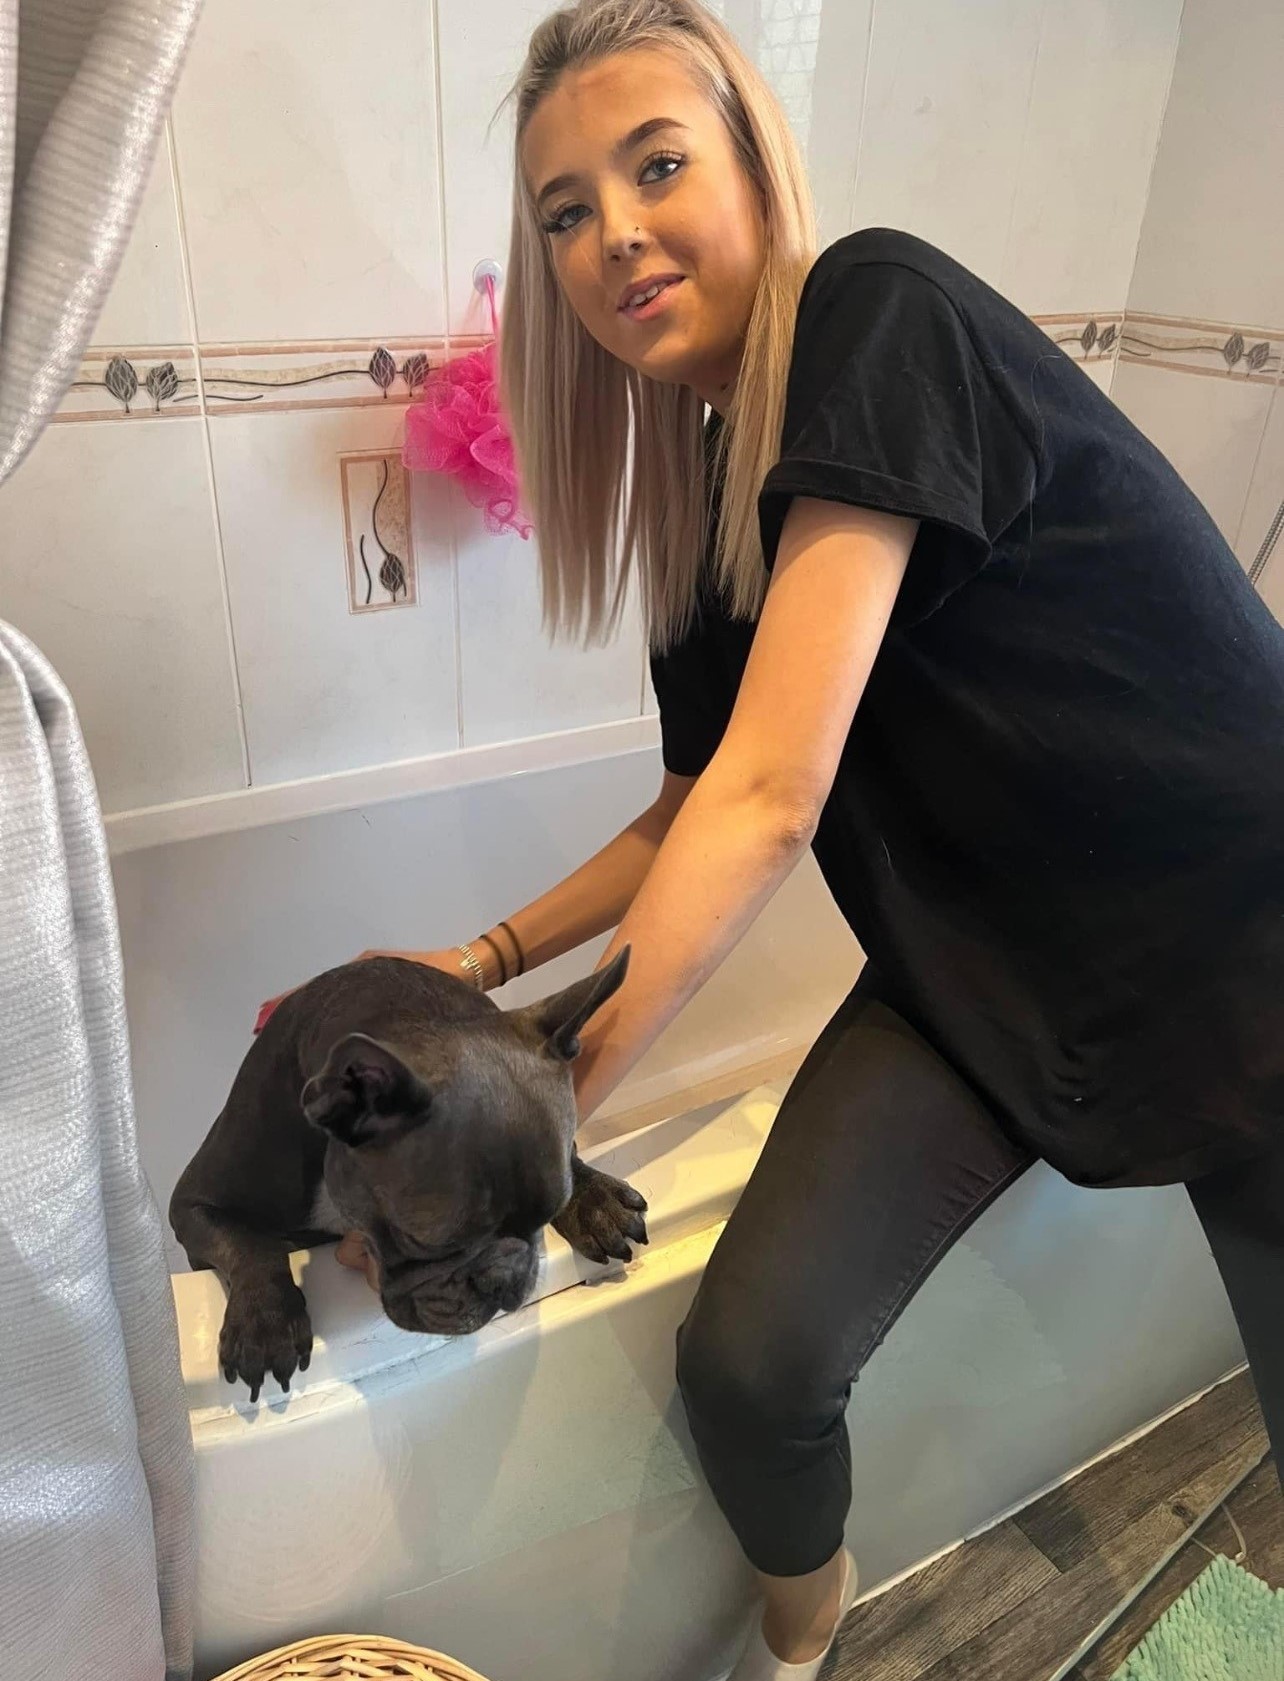 Elle sends photos and videos to customers so they can see their dogs enjoying their pamper session